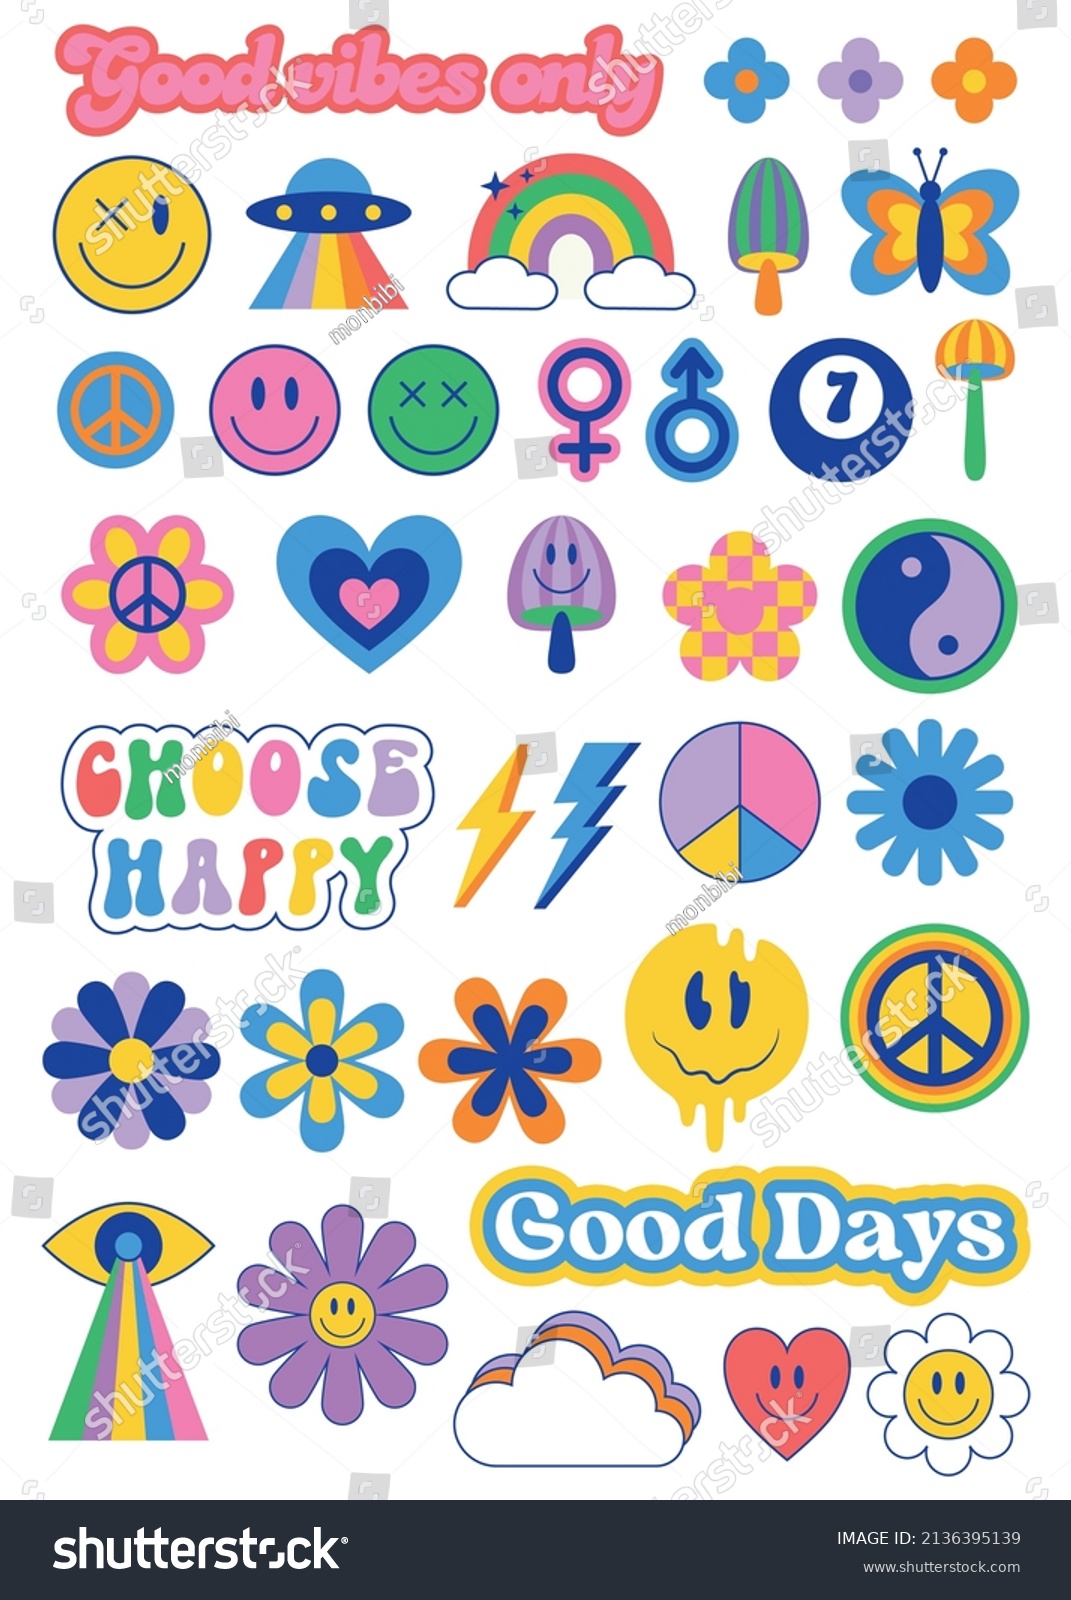 Groovy Hippie Style 70s 90s Clipart Stock Vector (Royalty Free ...